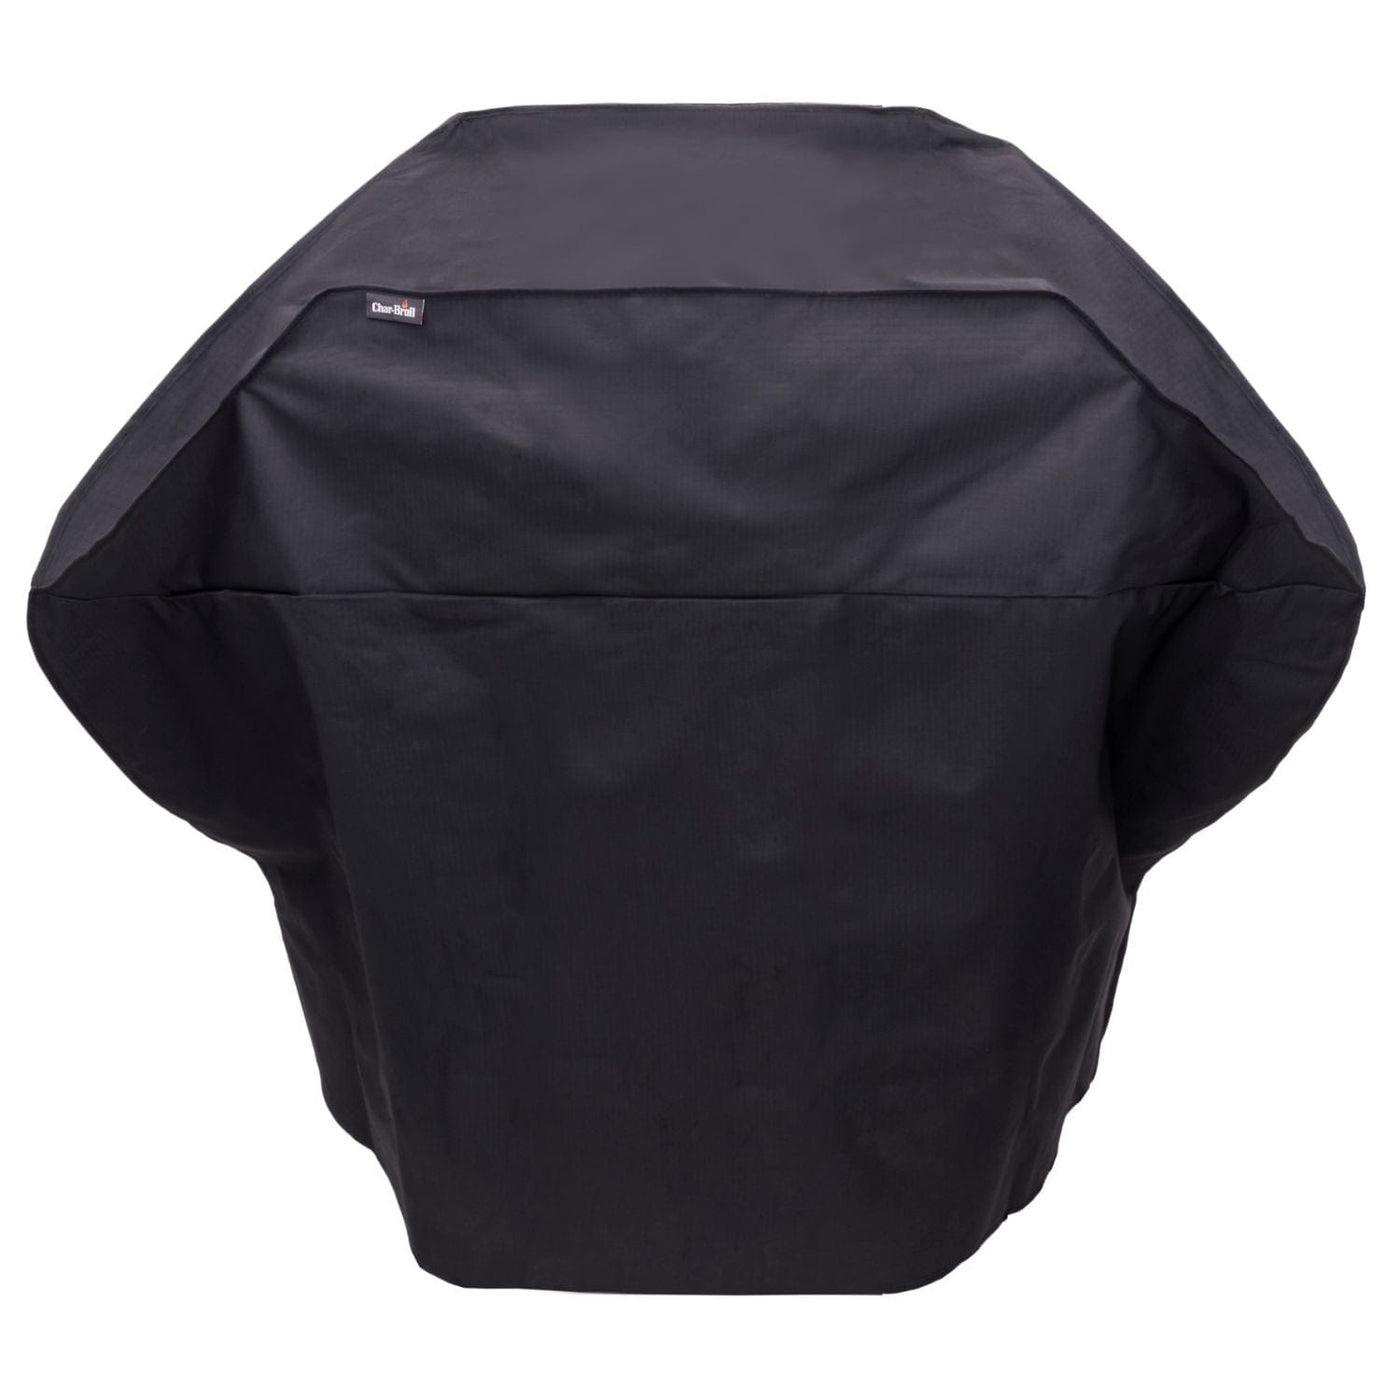 Char-Broil Char-Broil Medium 2 Burner Rip-Stop Grill Cover Camping And Outdoor